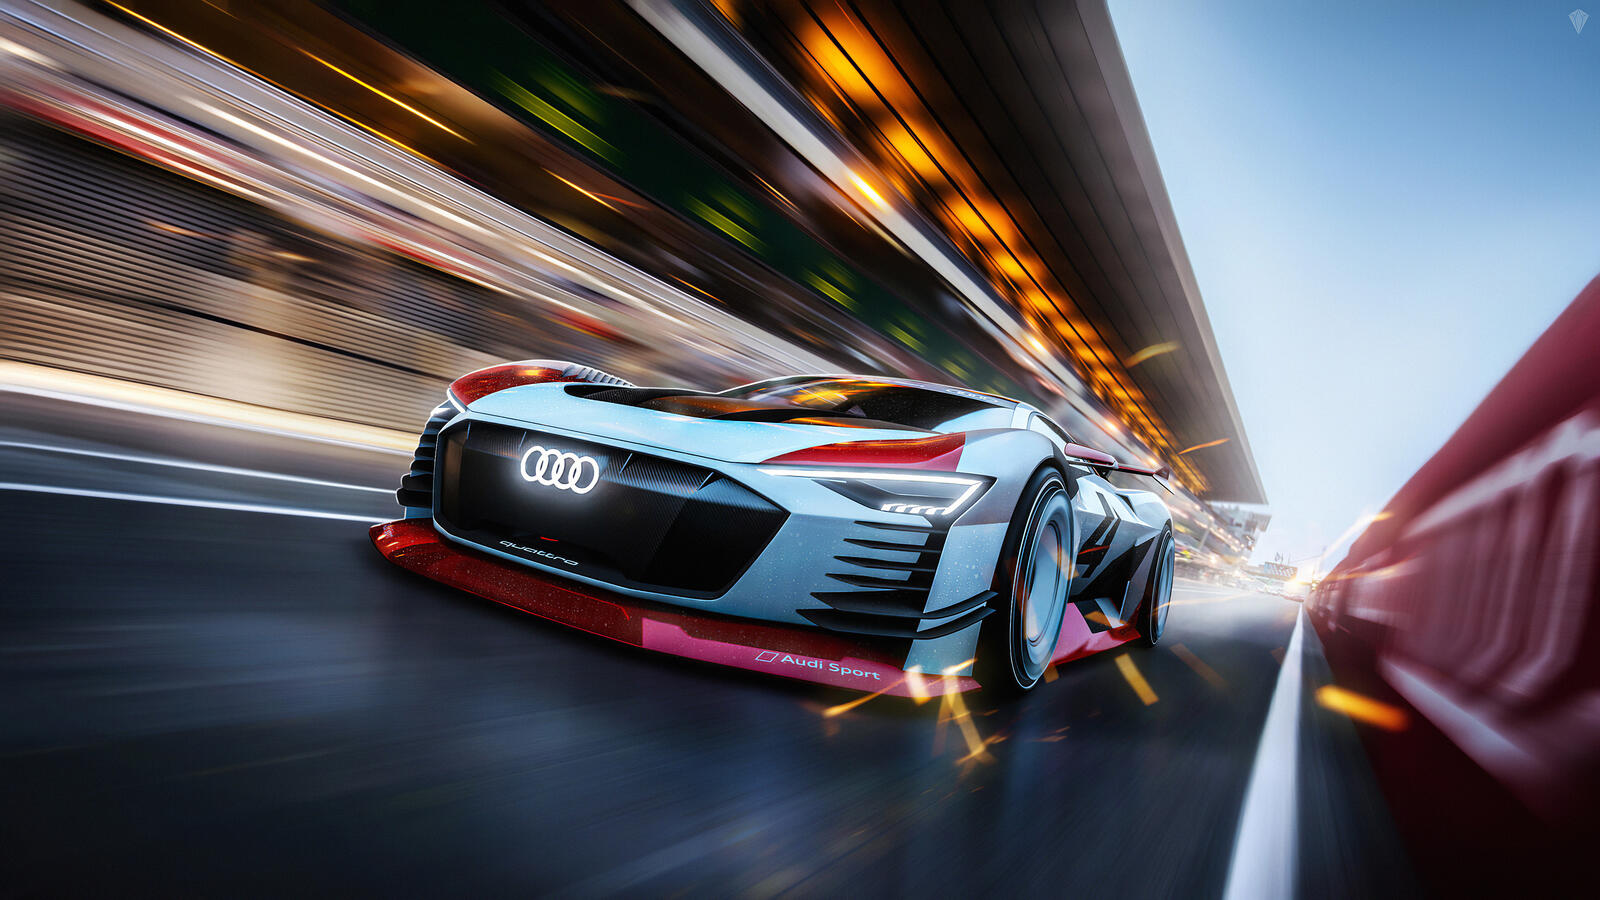 Wallpapers Audi cars in move on the desktop